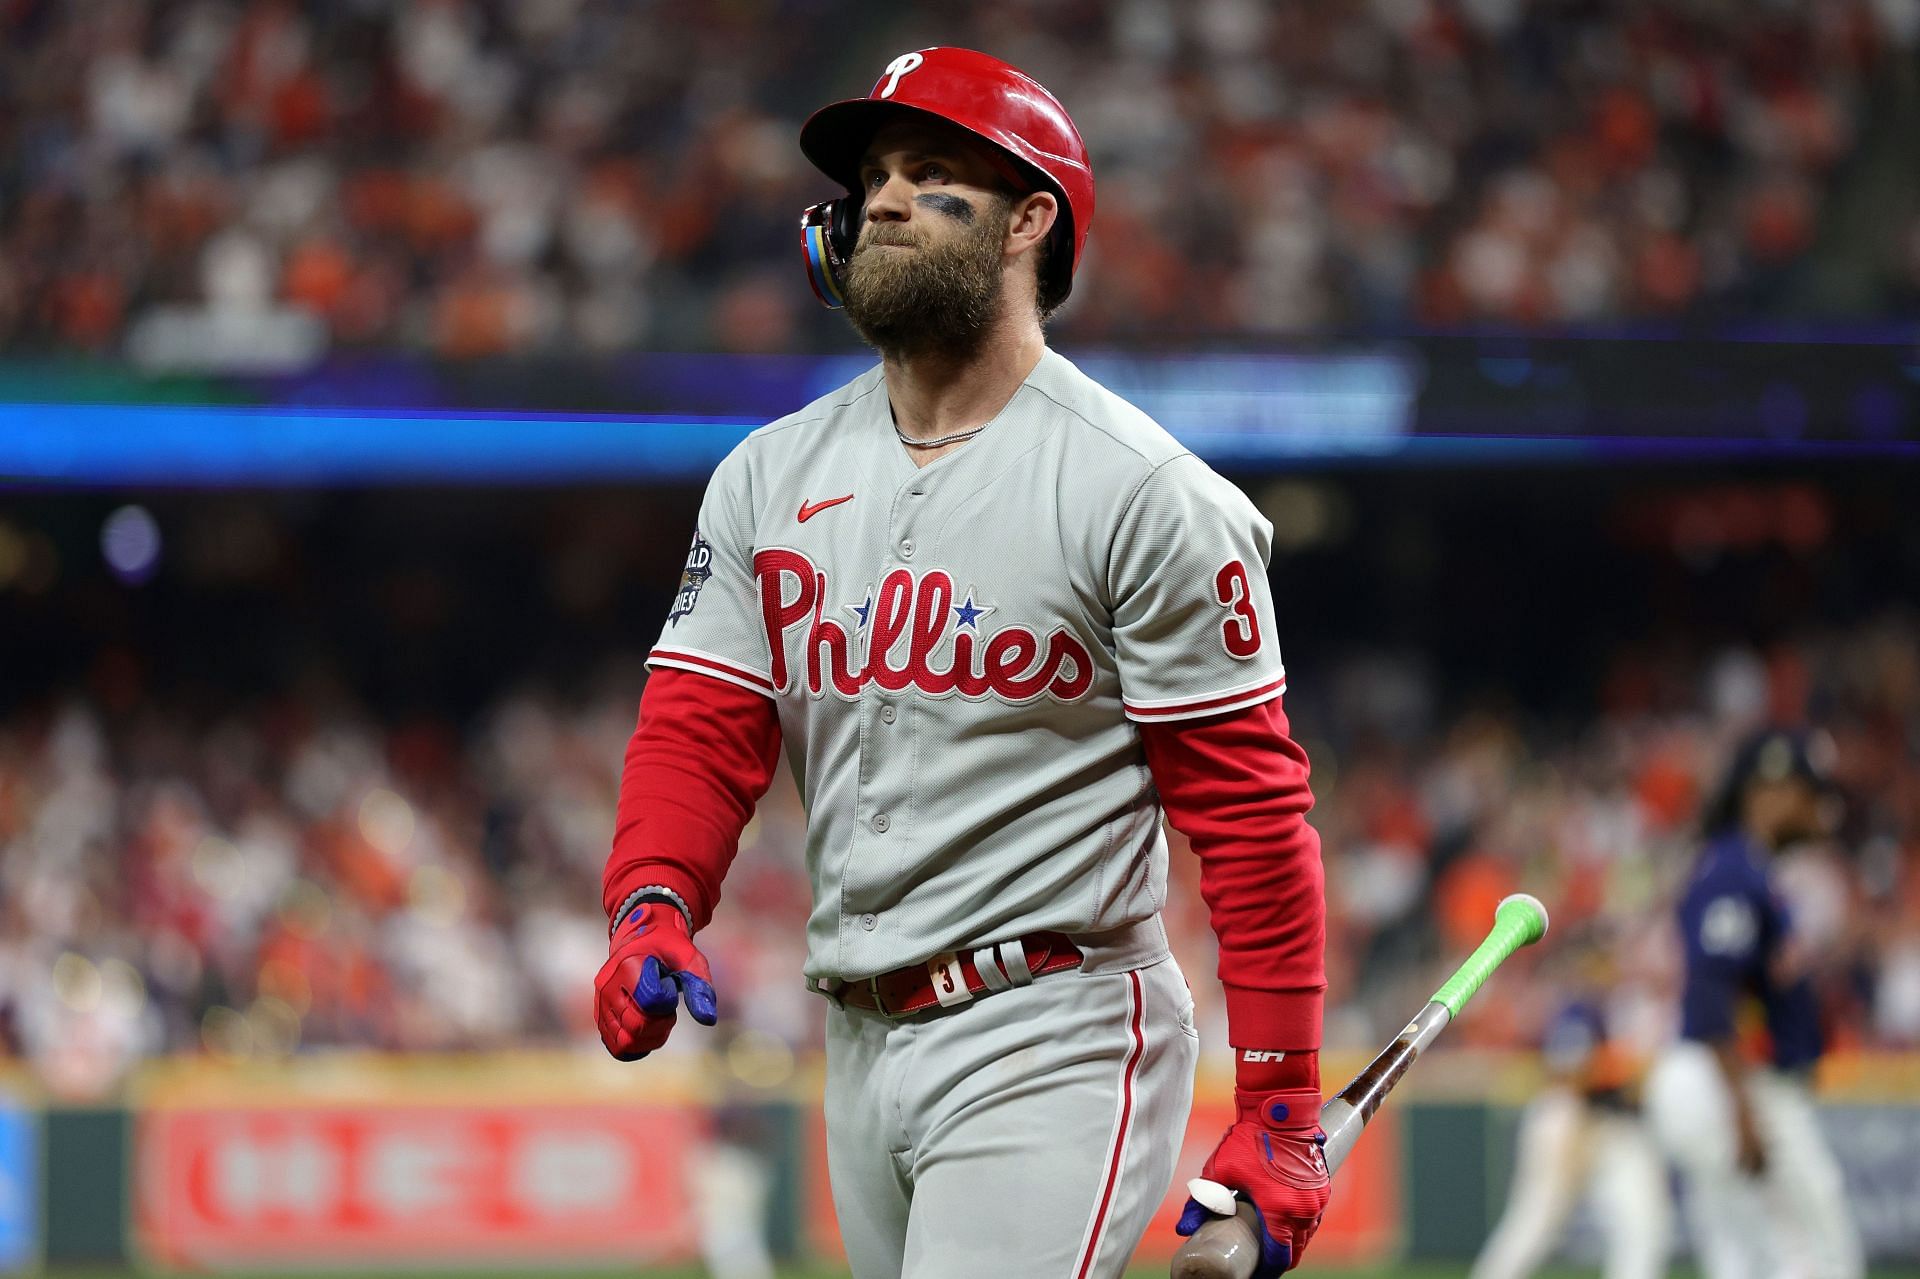 Bryce Harper of the Philadelphia Phillies reacts after striking out.